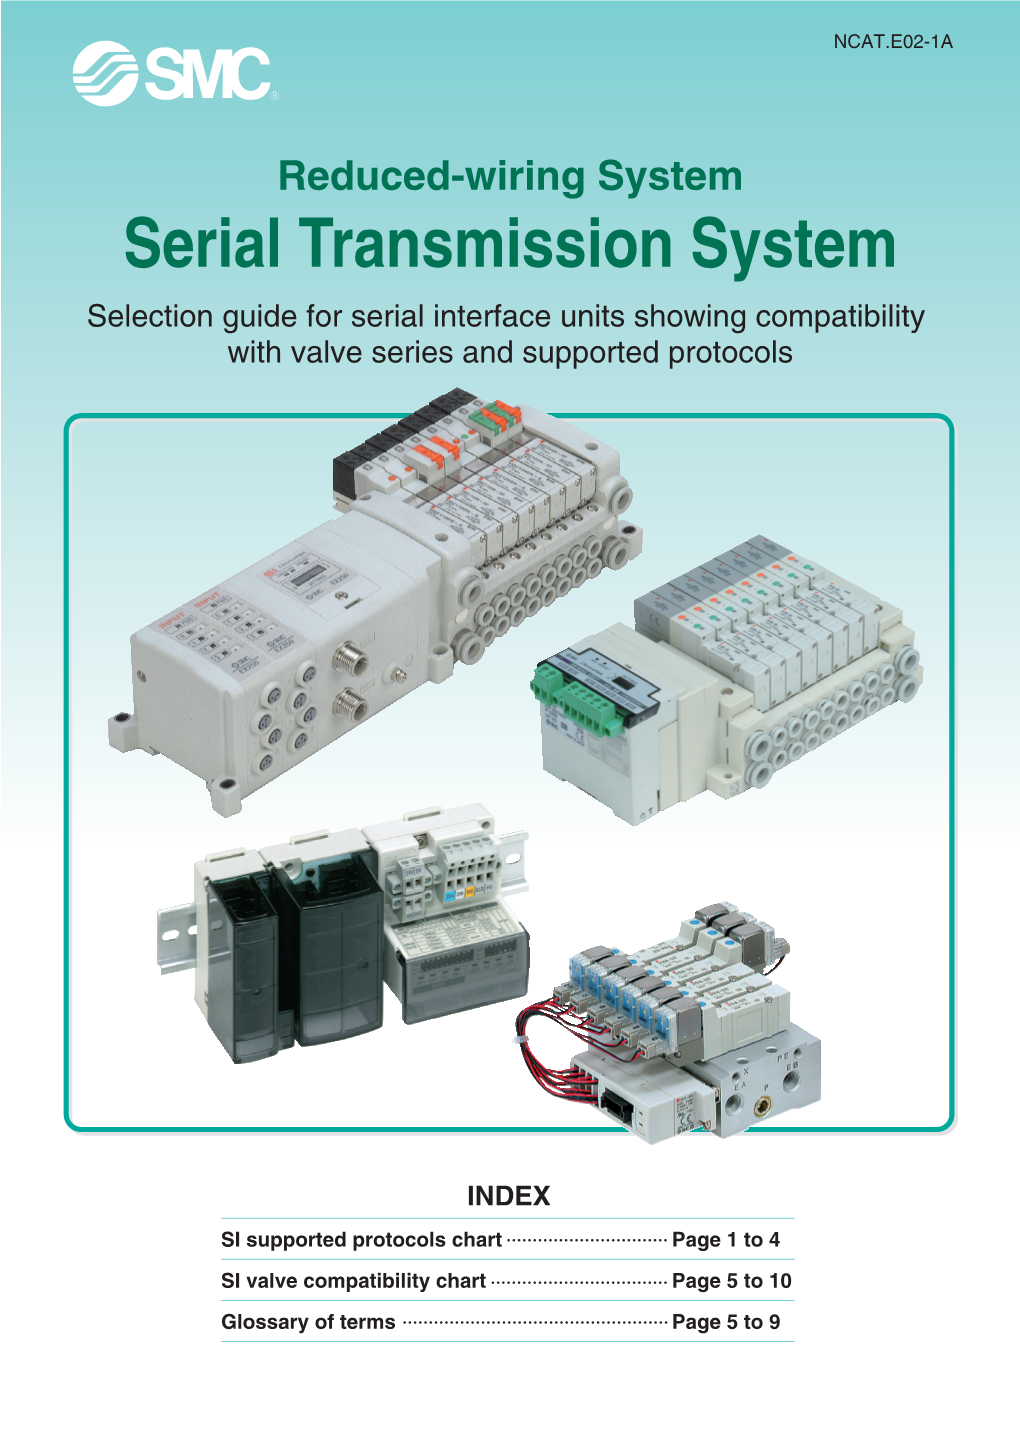 Serial Transmission System Selection Guide for Serial Interface Units Showing Compatibility with Valve Series and Supported Protocols